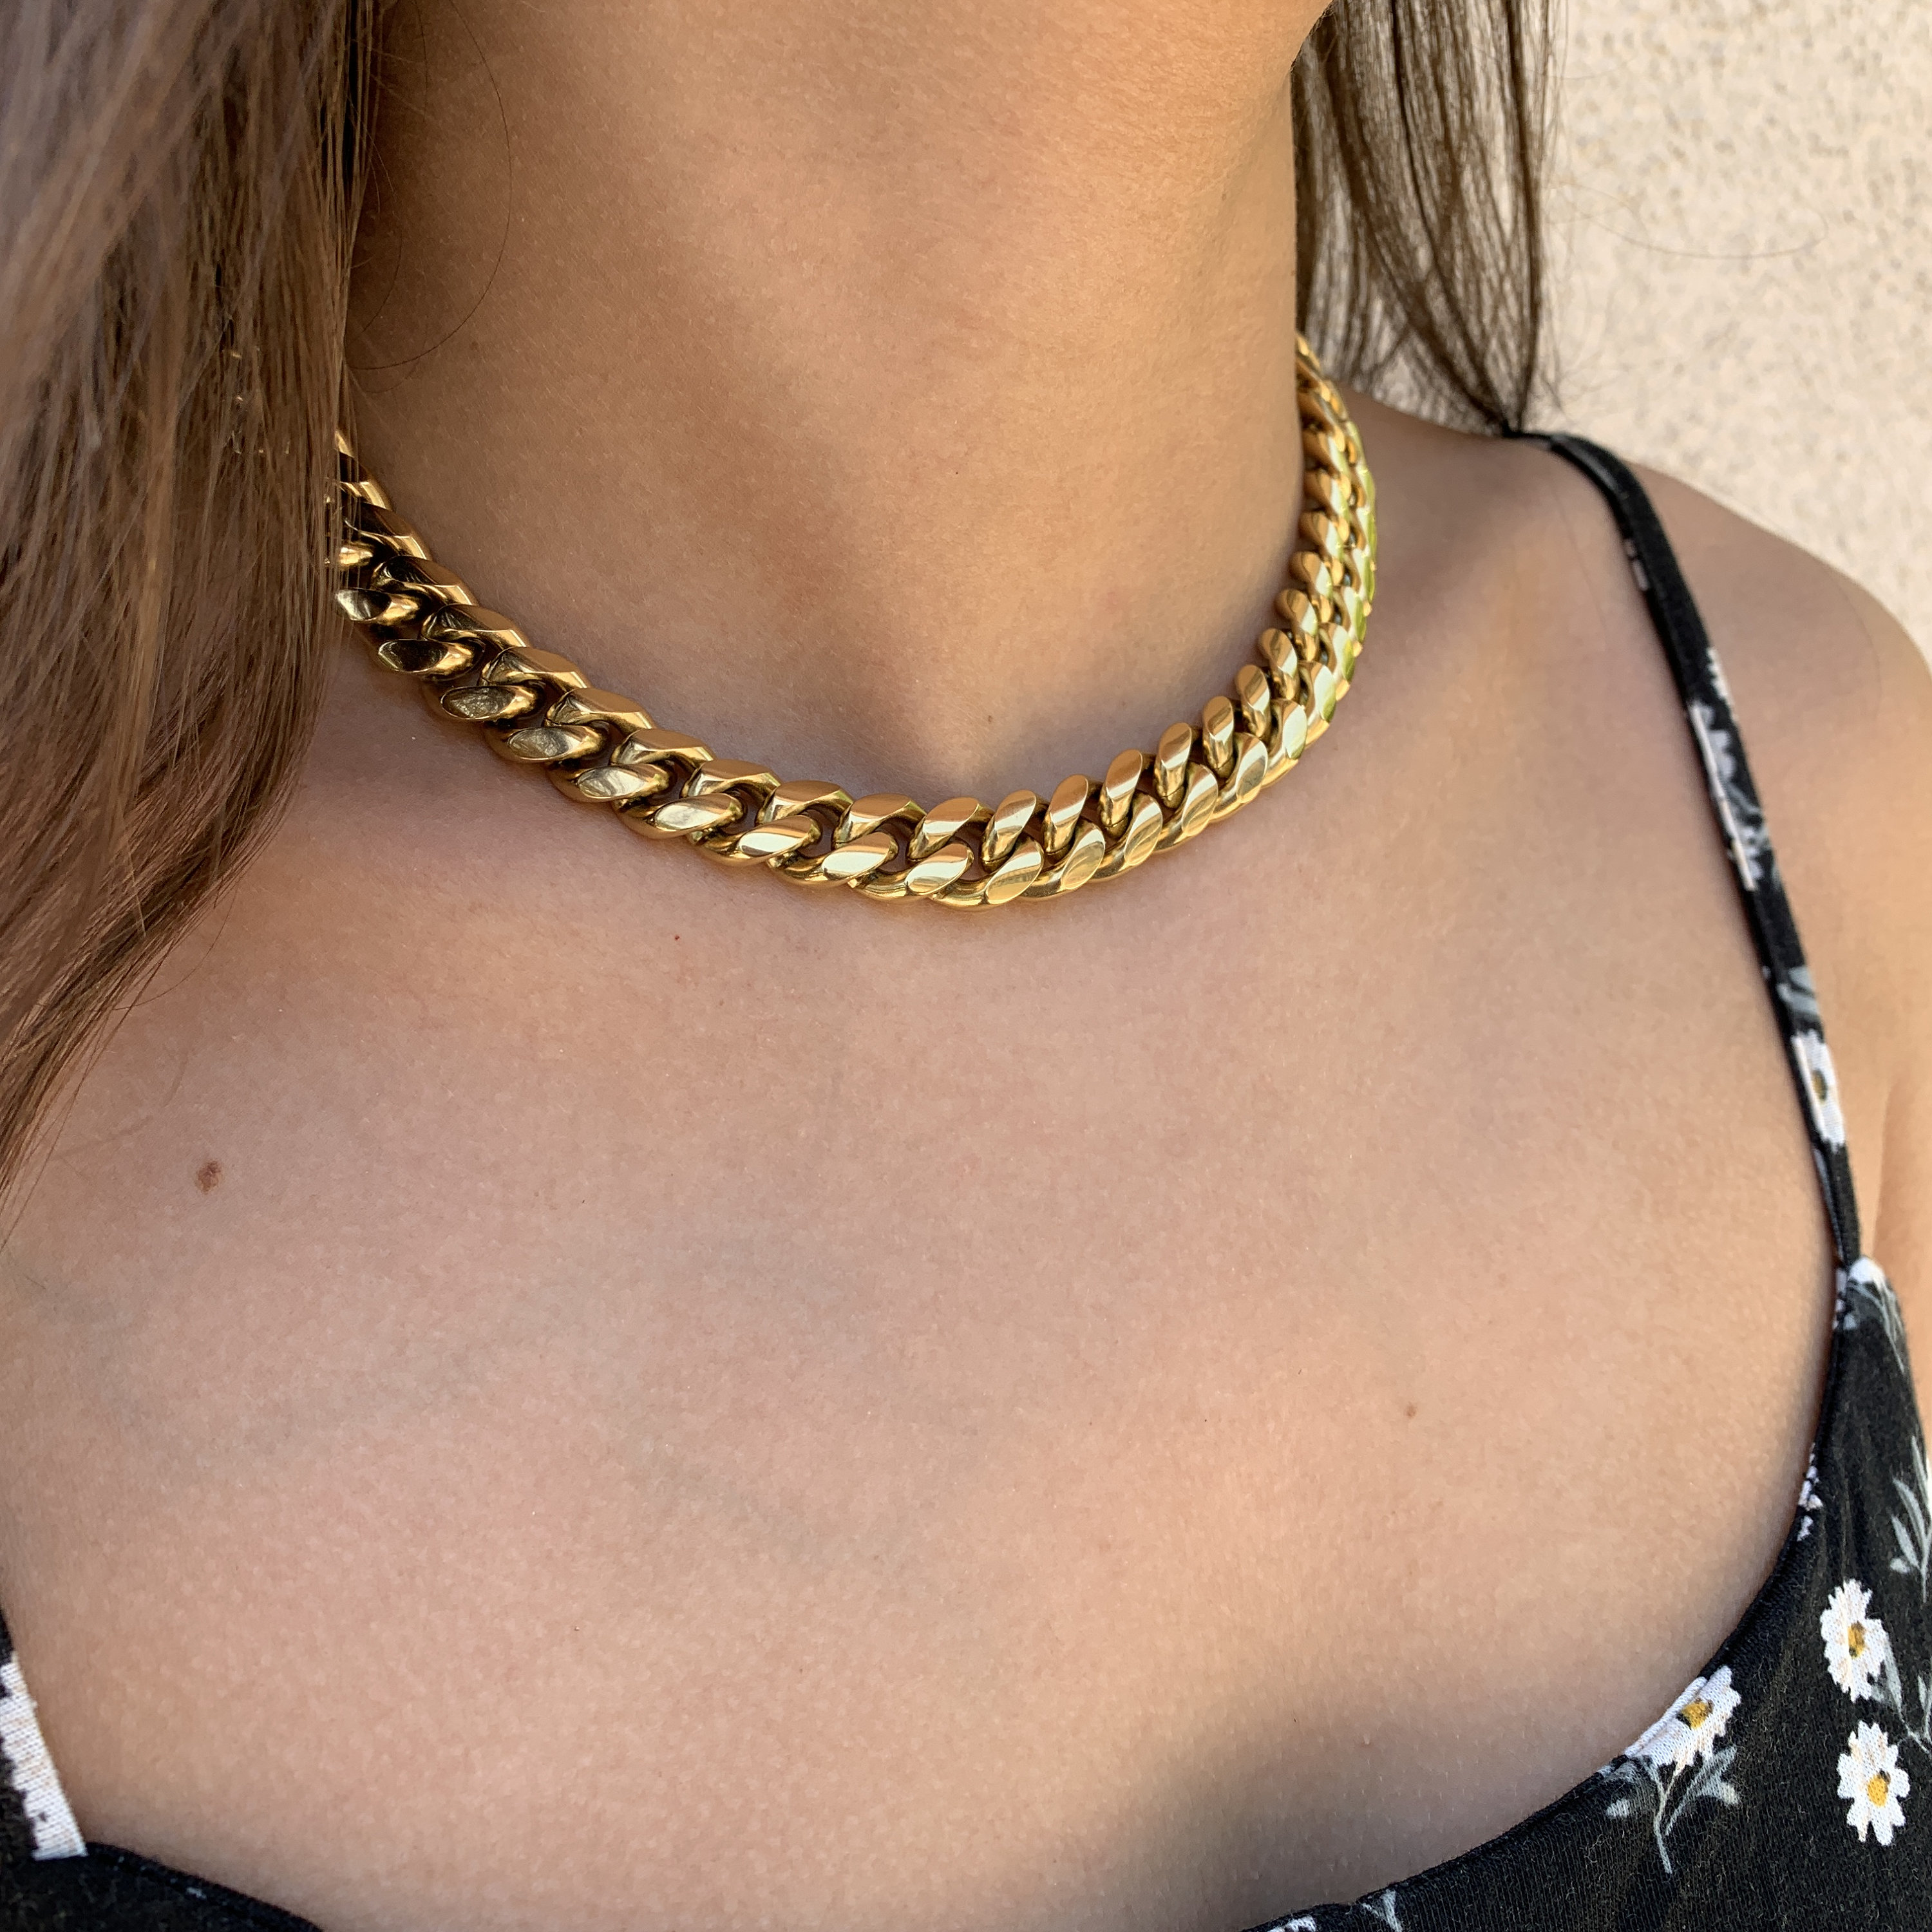 Women's Stainless Steel Silver/Gold Chunky Collar Choker Charm Chain Necklaces